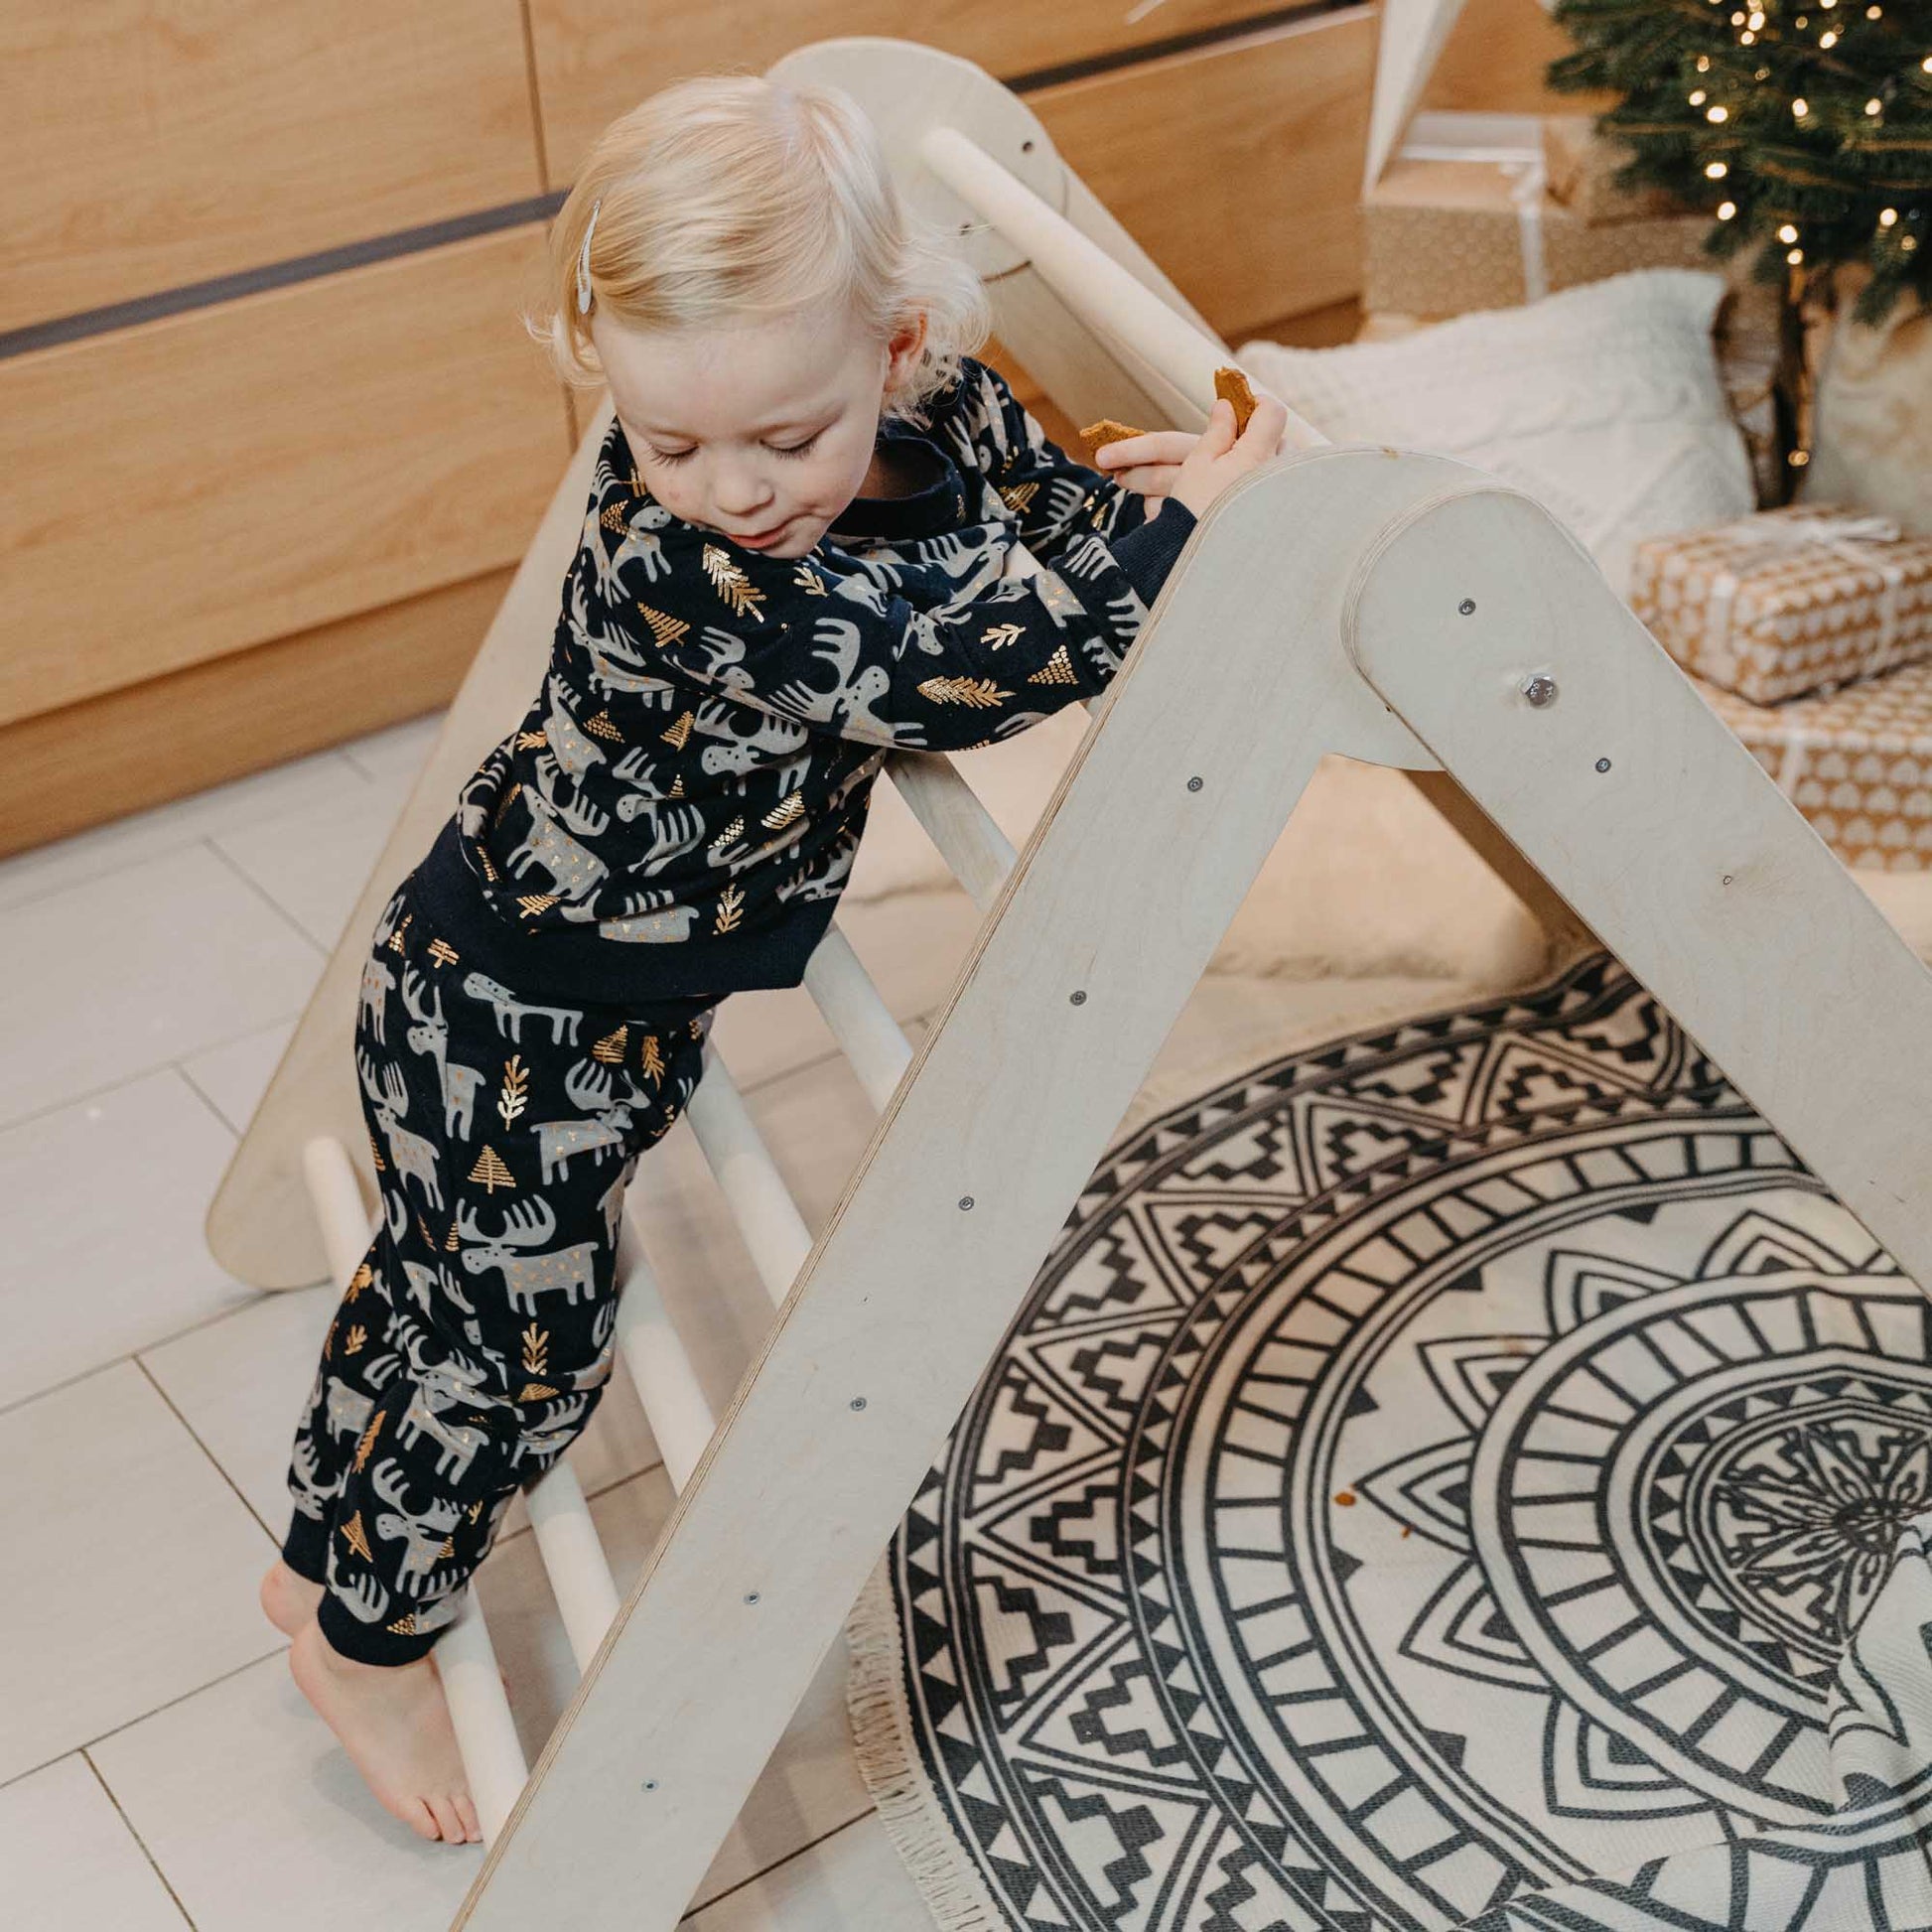 A child is climbing on a Transformable triangle + climbing cube / table and chair  + a ramp in front of a Christmas tree, enjoying the climbing fun.